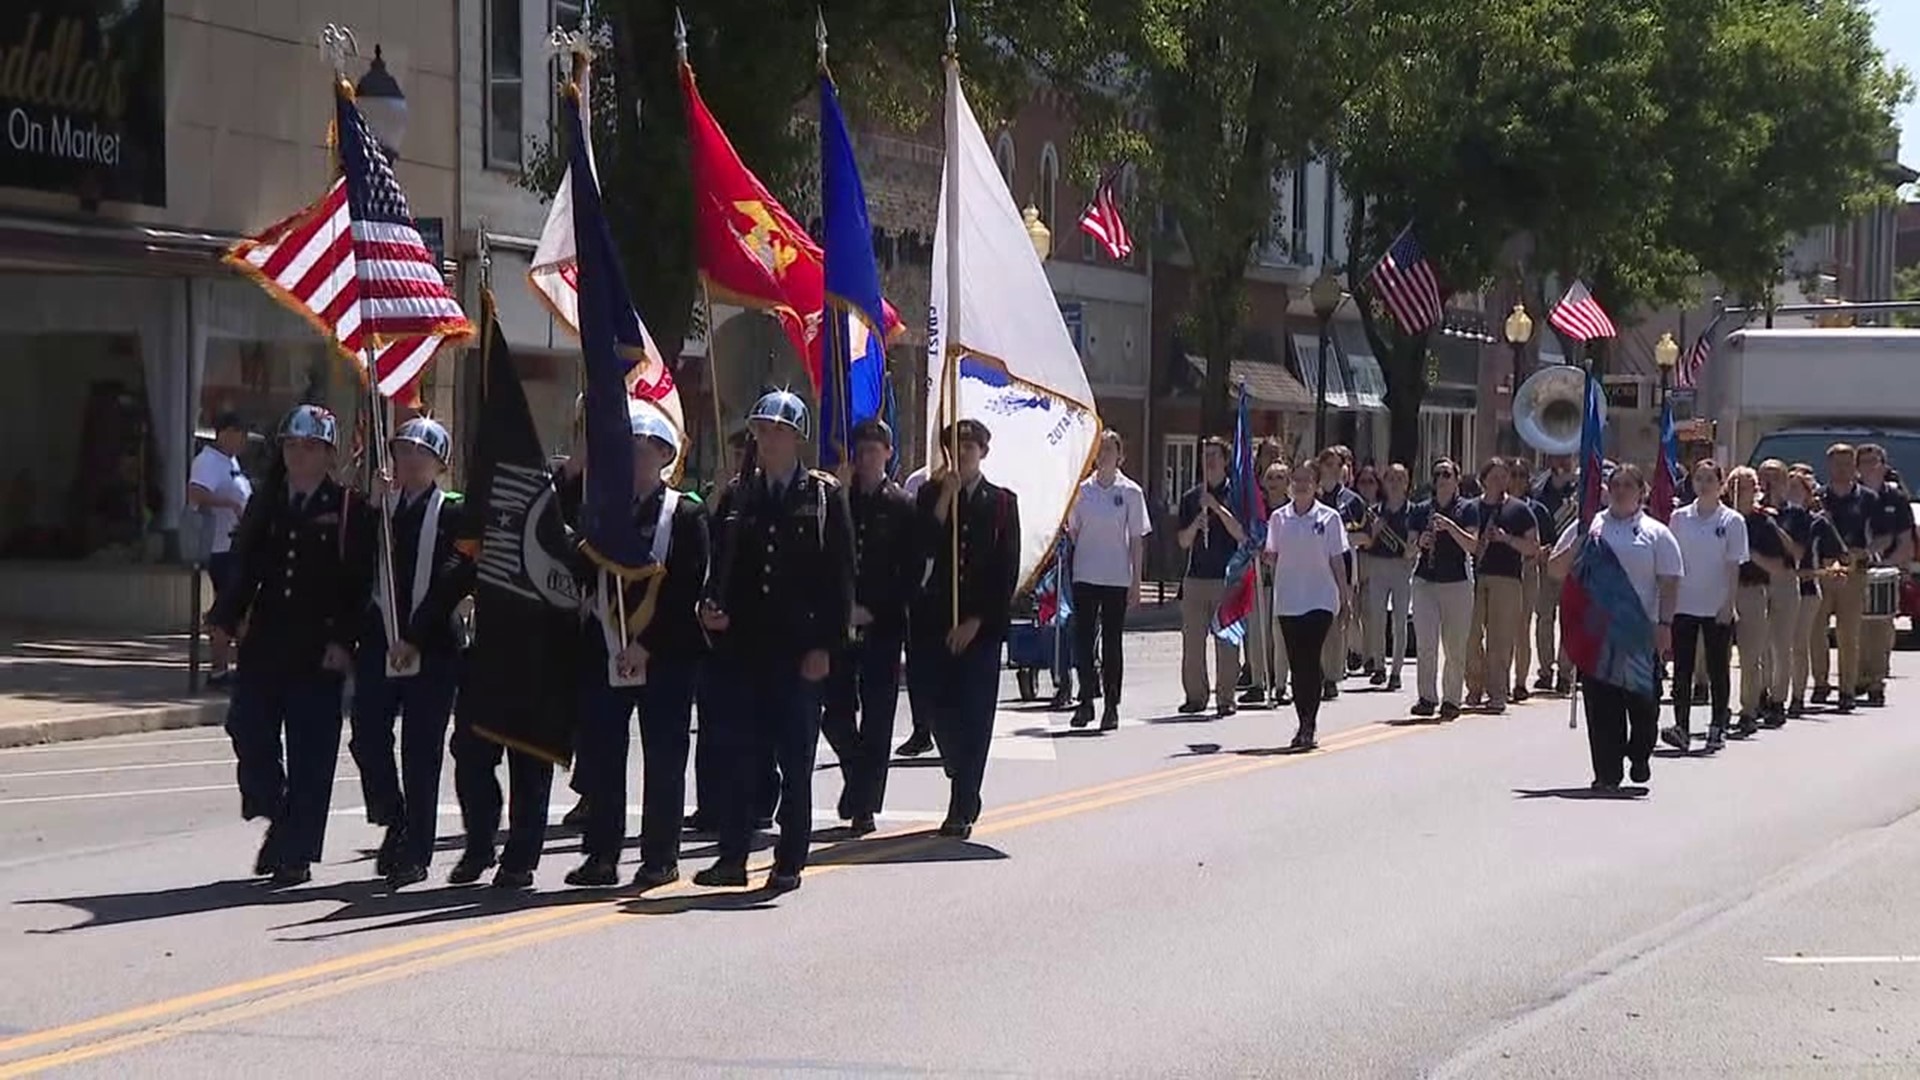 People in Northumberland County remembered our nation's fallen heroes with a parade.